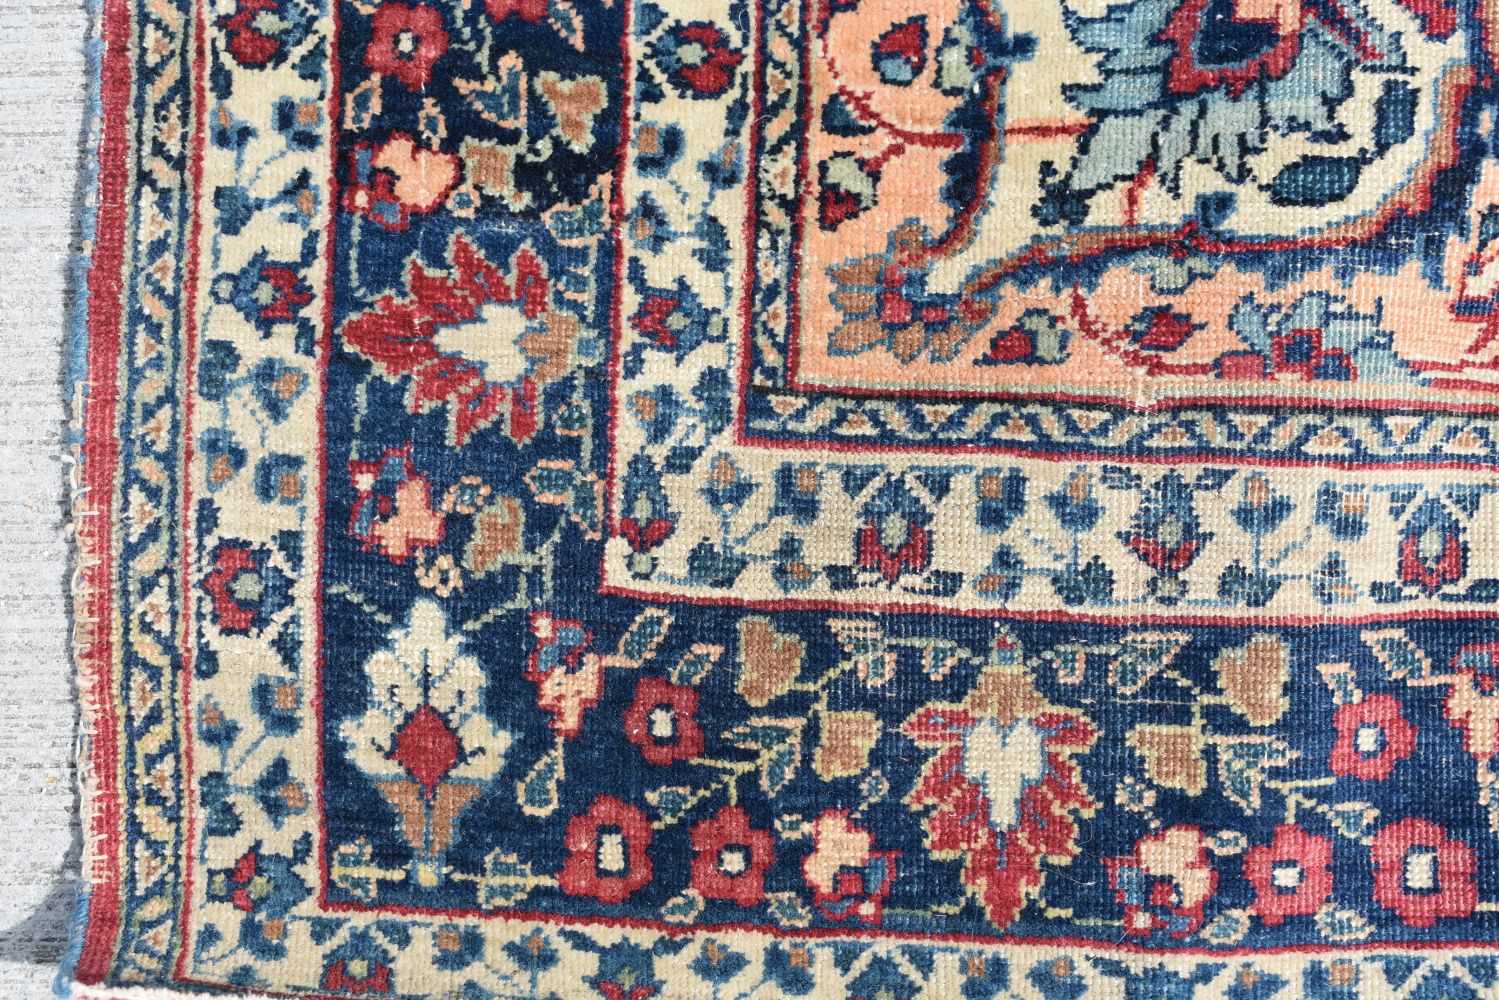 A Persian rug 189 x 122 cm - Image 3 of 14